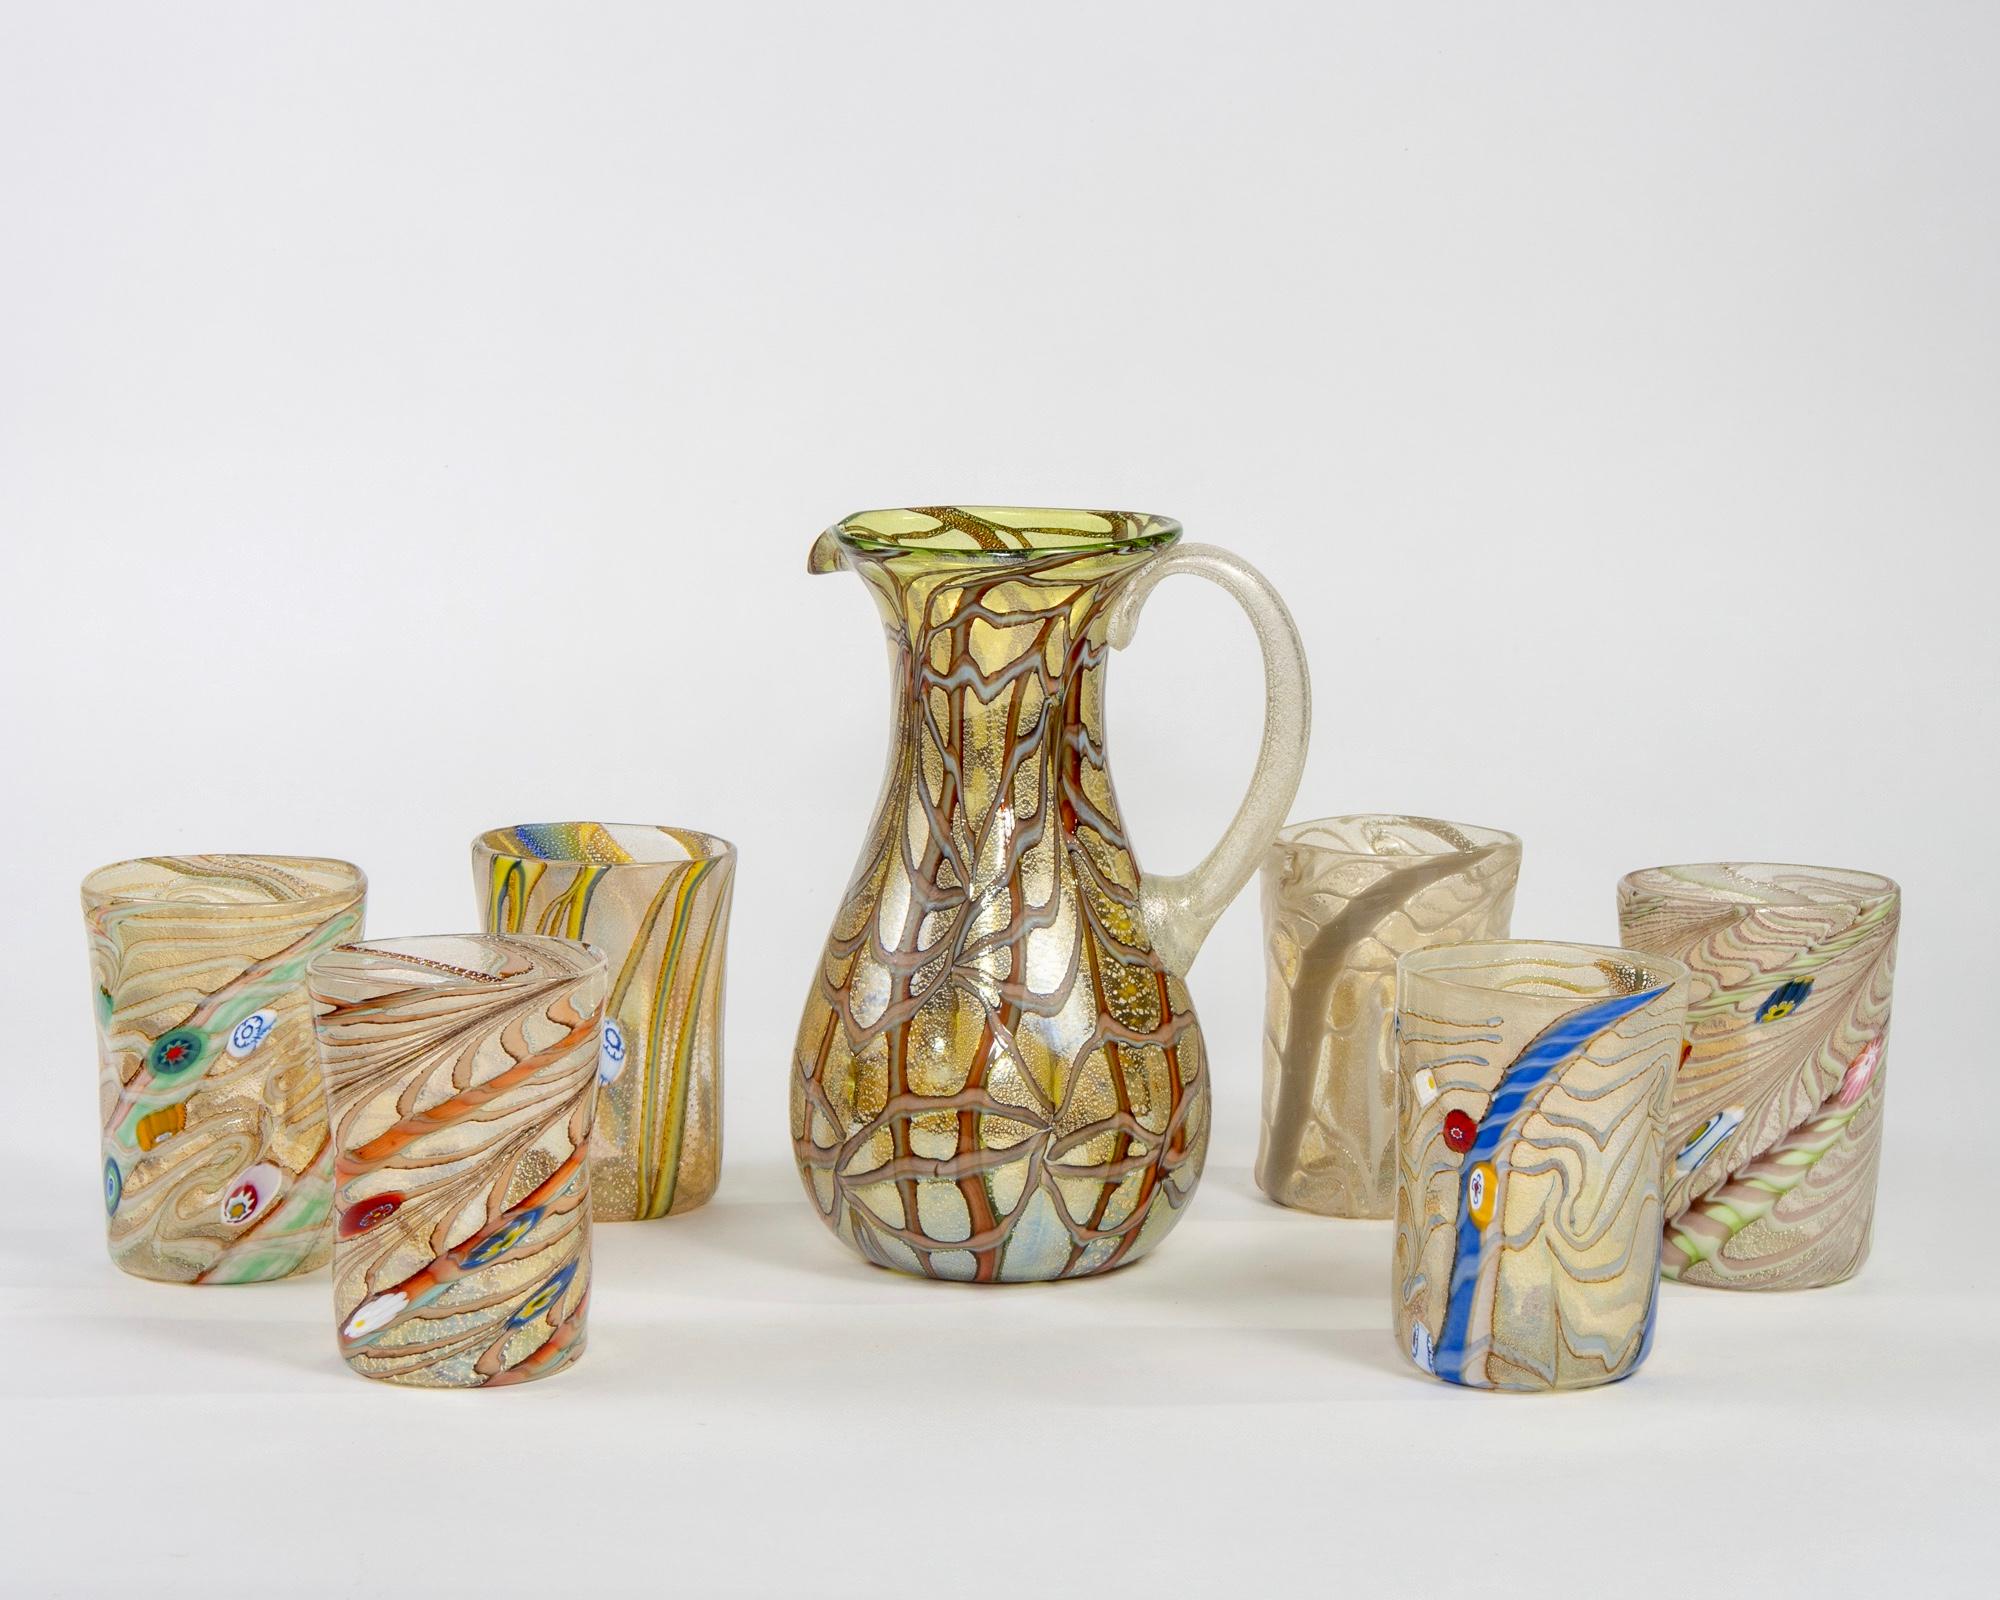 Contemporary set of handcrafted Murano glass pitcher and six coordinating glasses. Pitcher is made of gold and silvery glass with amber and brown accents; glasses have silver, white, gold, brown, red and blue accents. Makes a beautiful gift for a